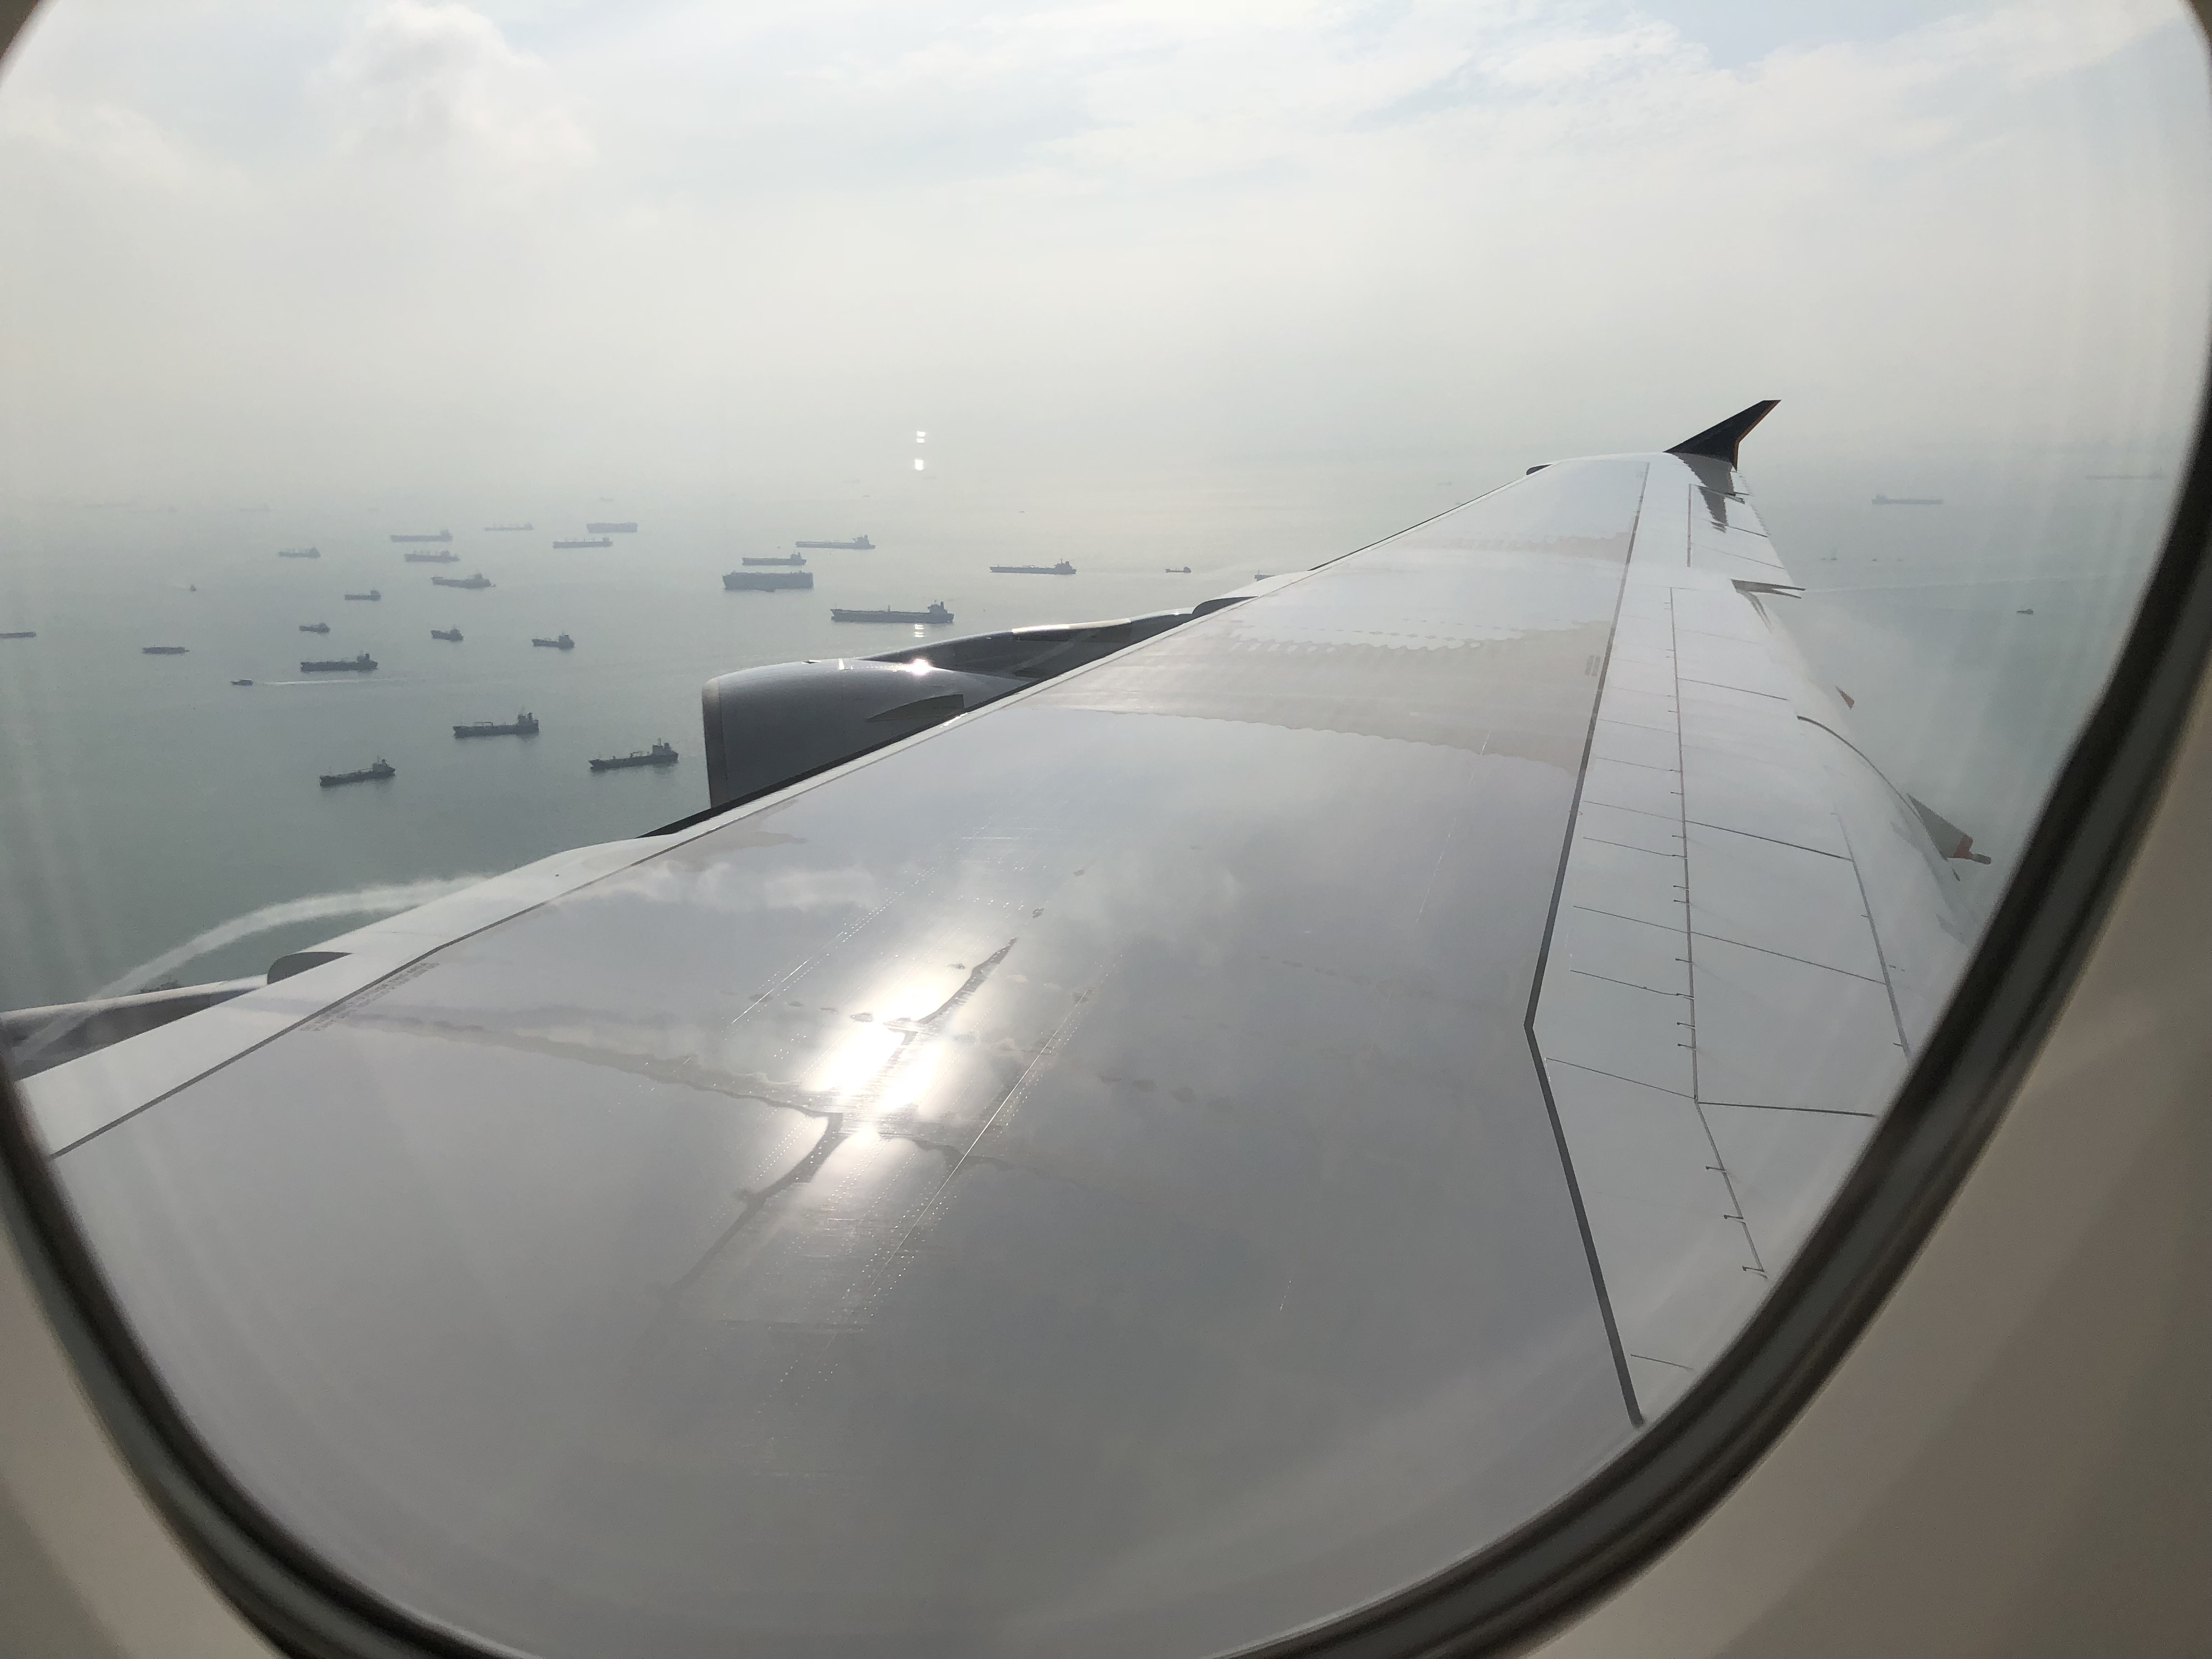 a view of a plane wing and a body of water from a window